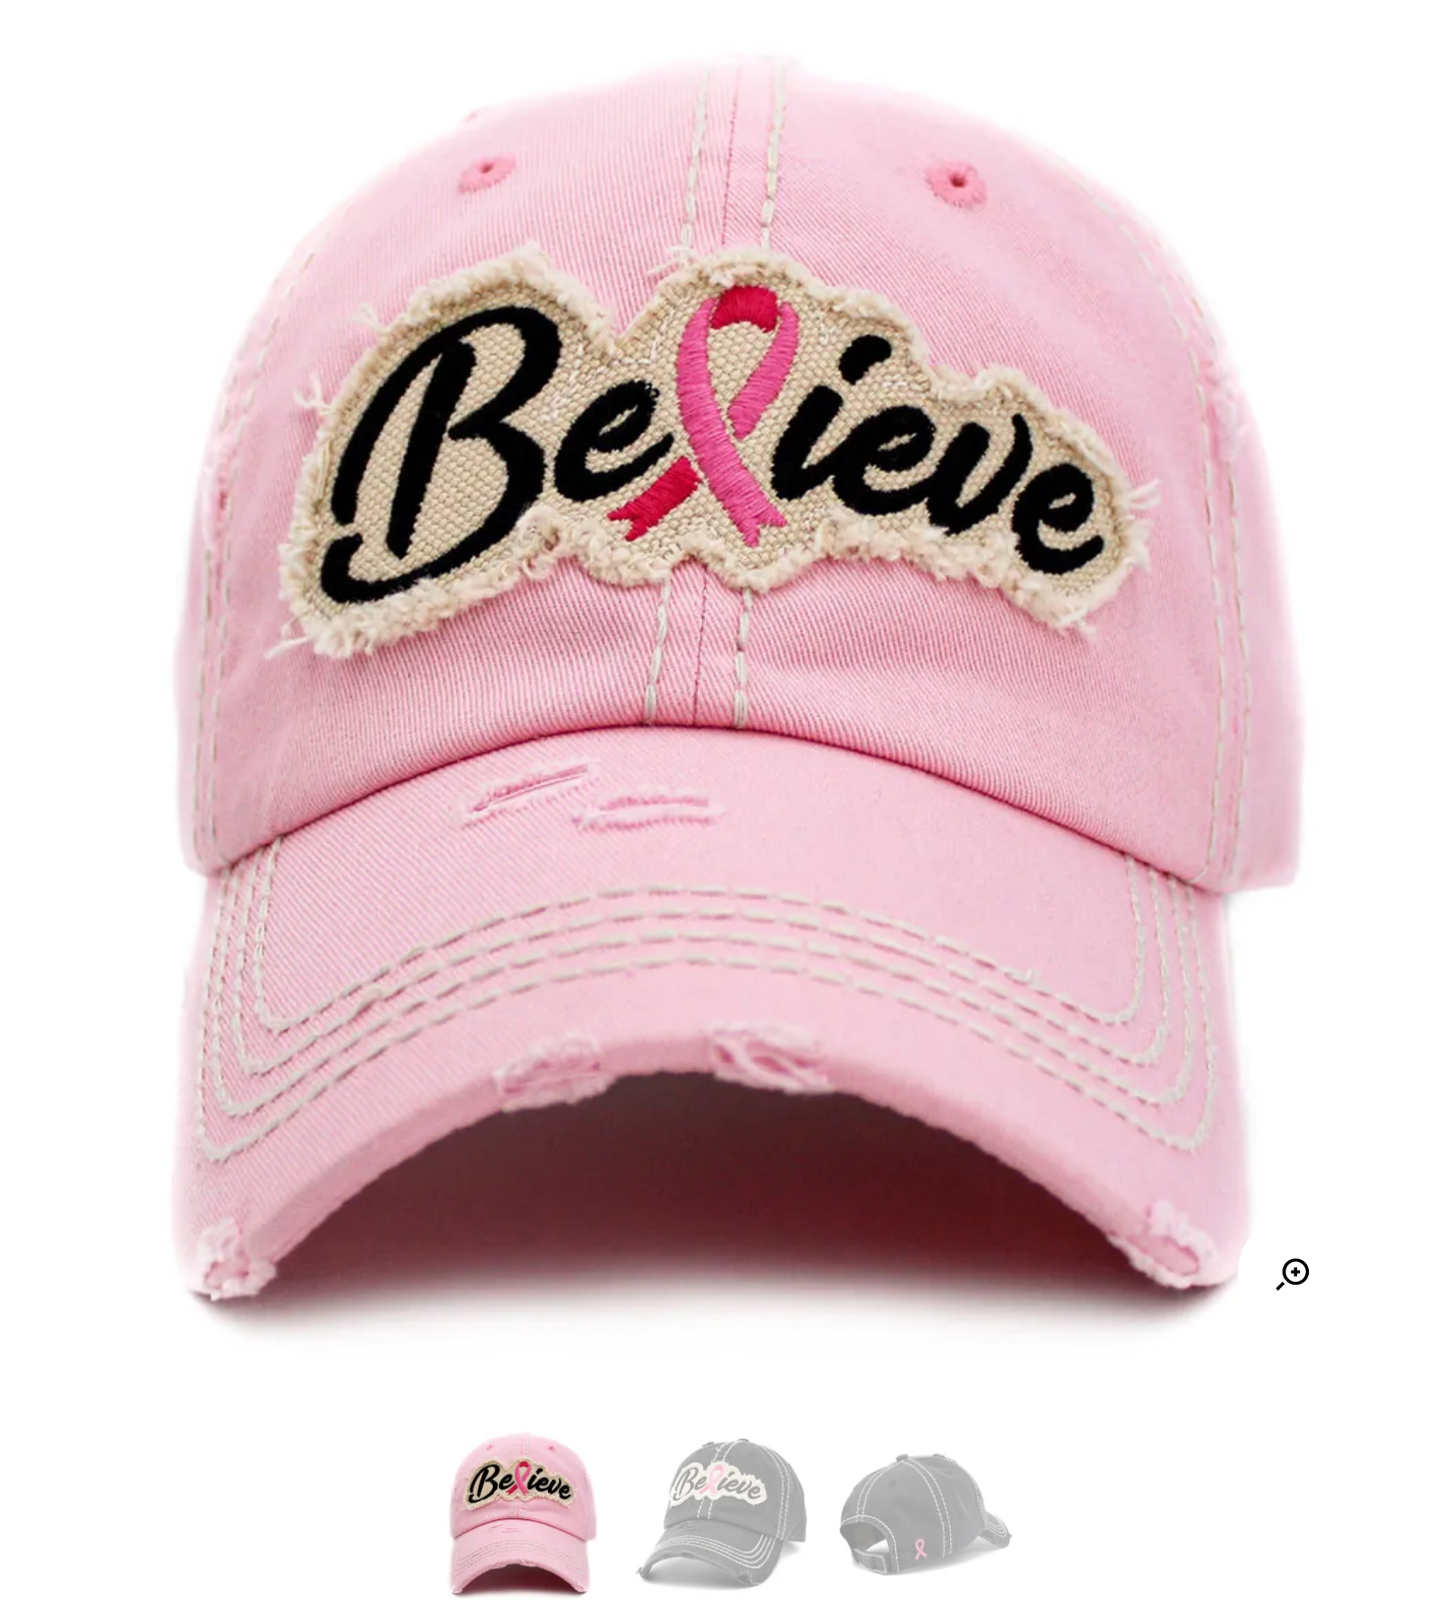 “Believe” Pink Ribbon Washed Vintage Ball Cap